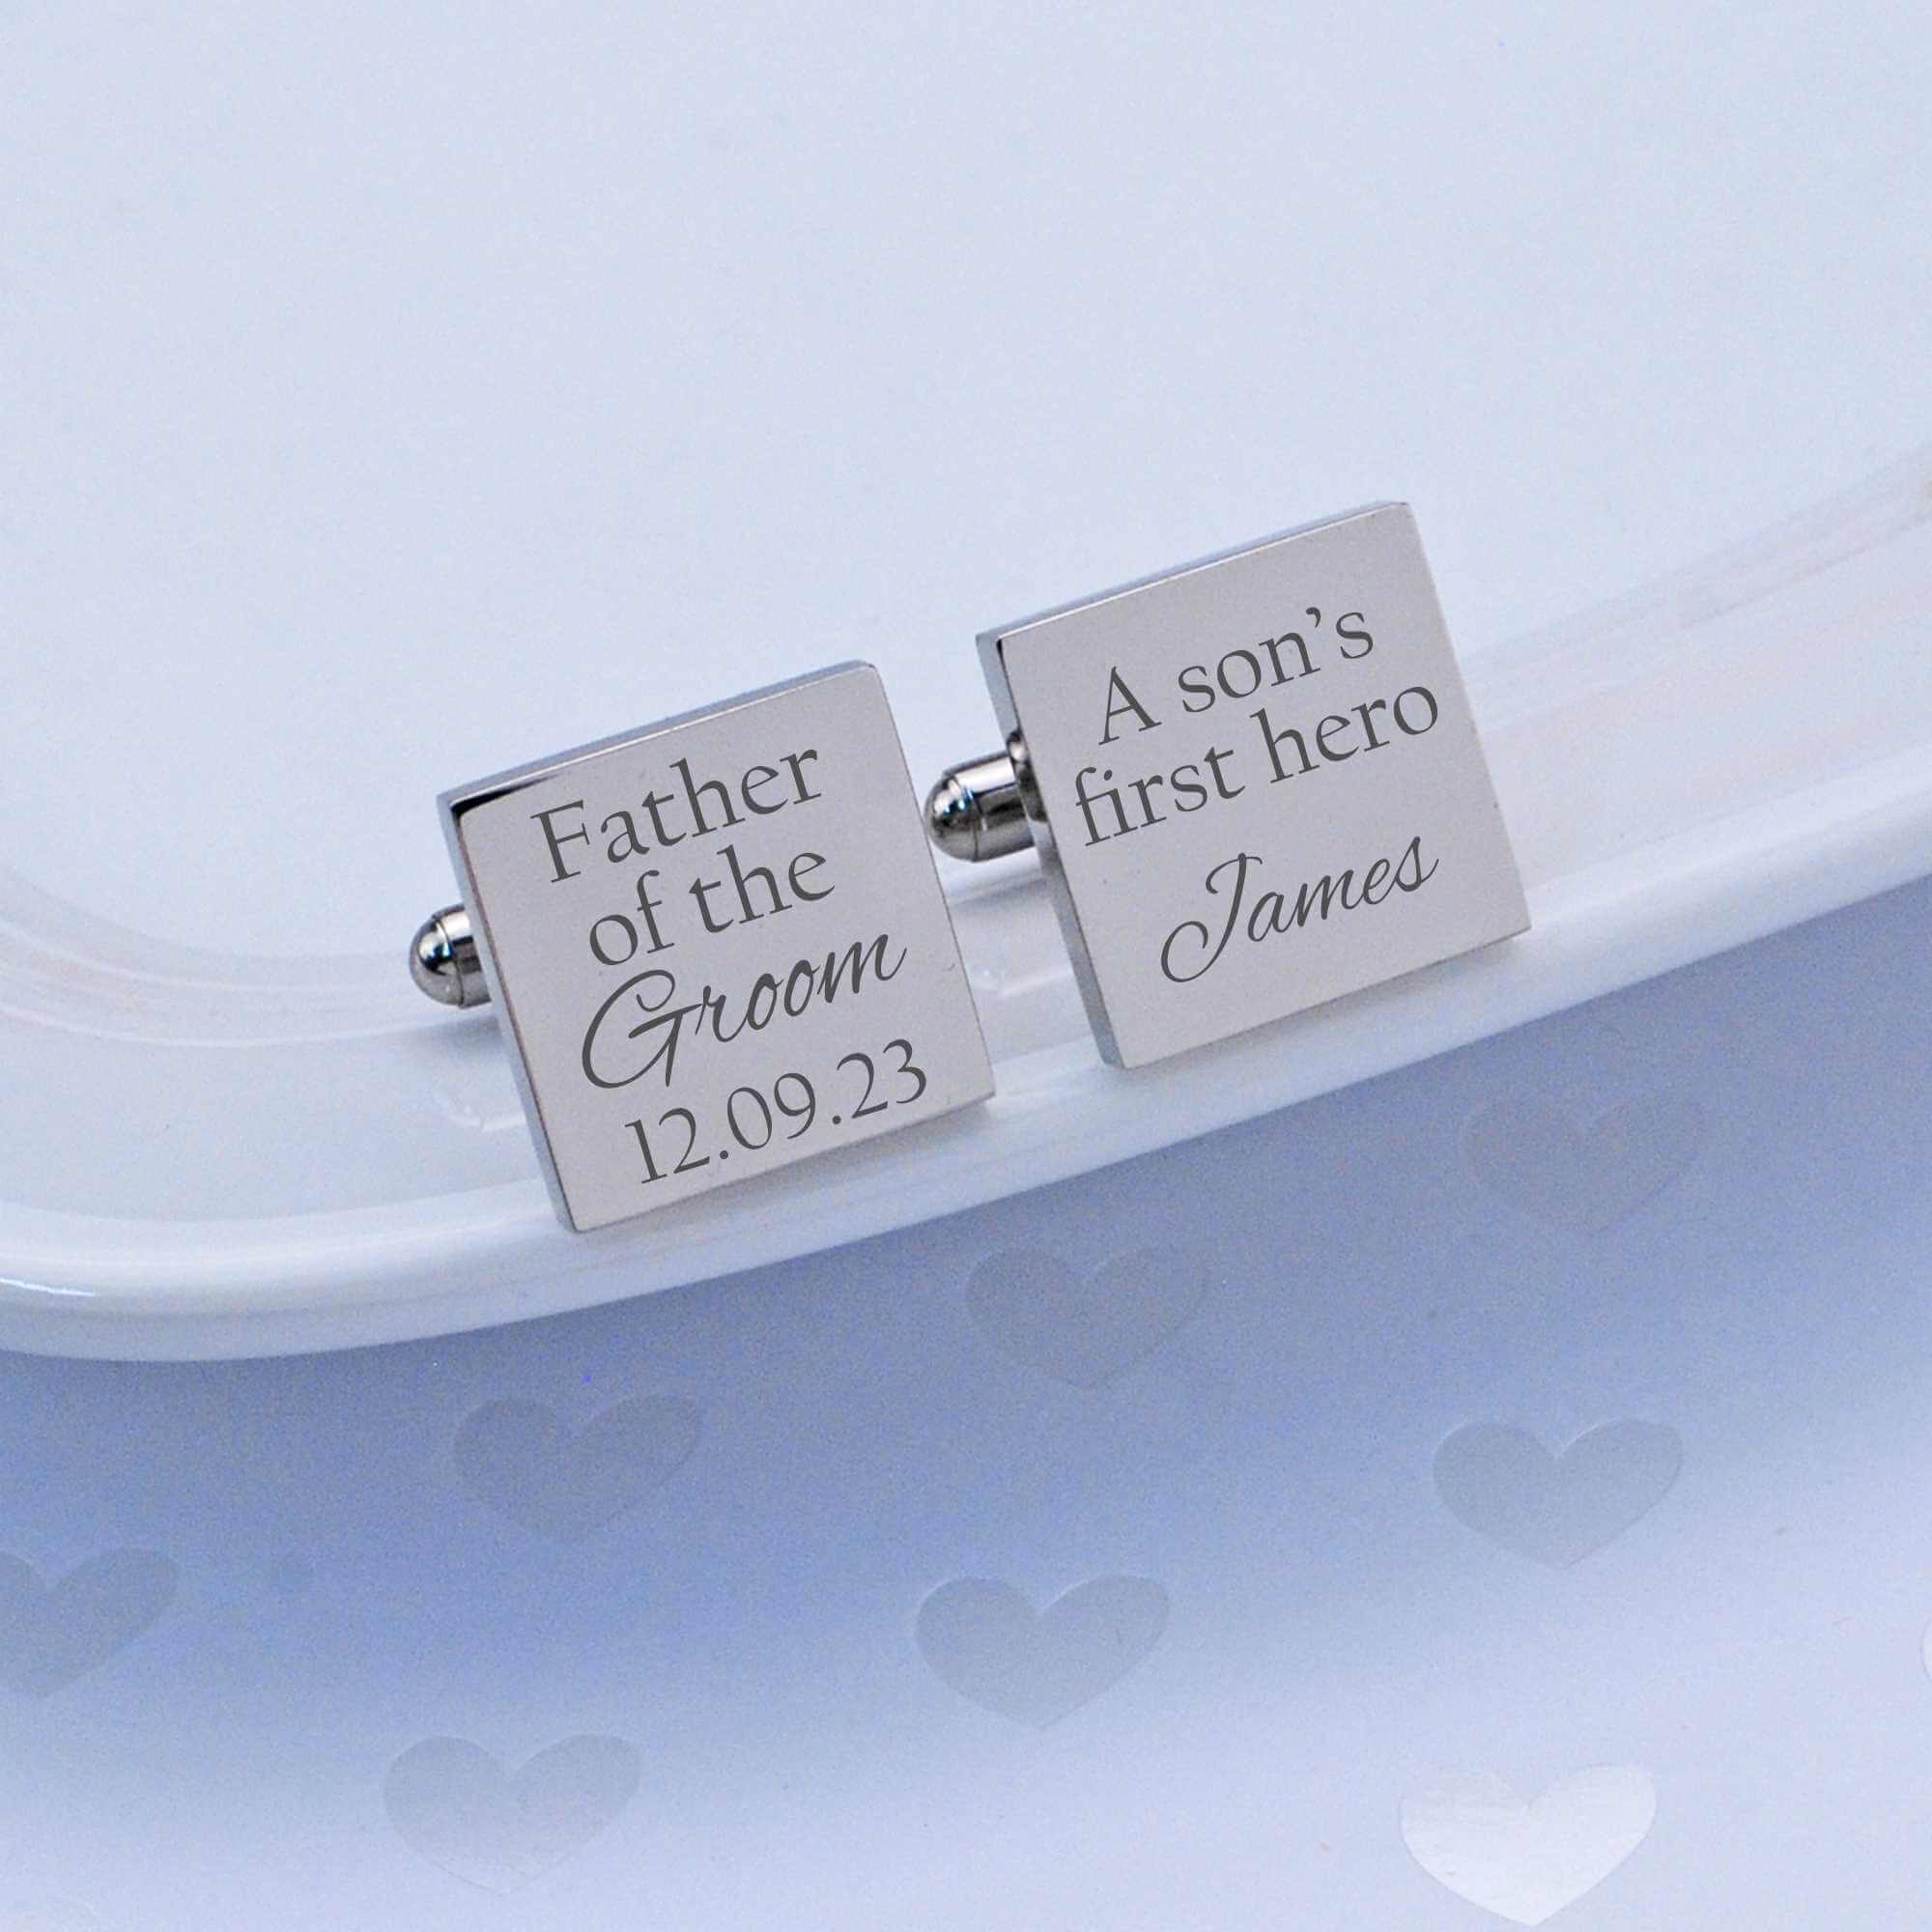 A Son's First Hero - Father of the Groom Cufflinks